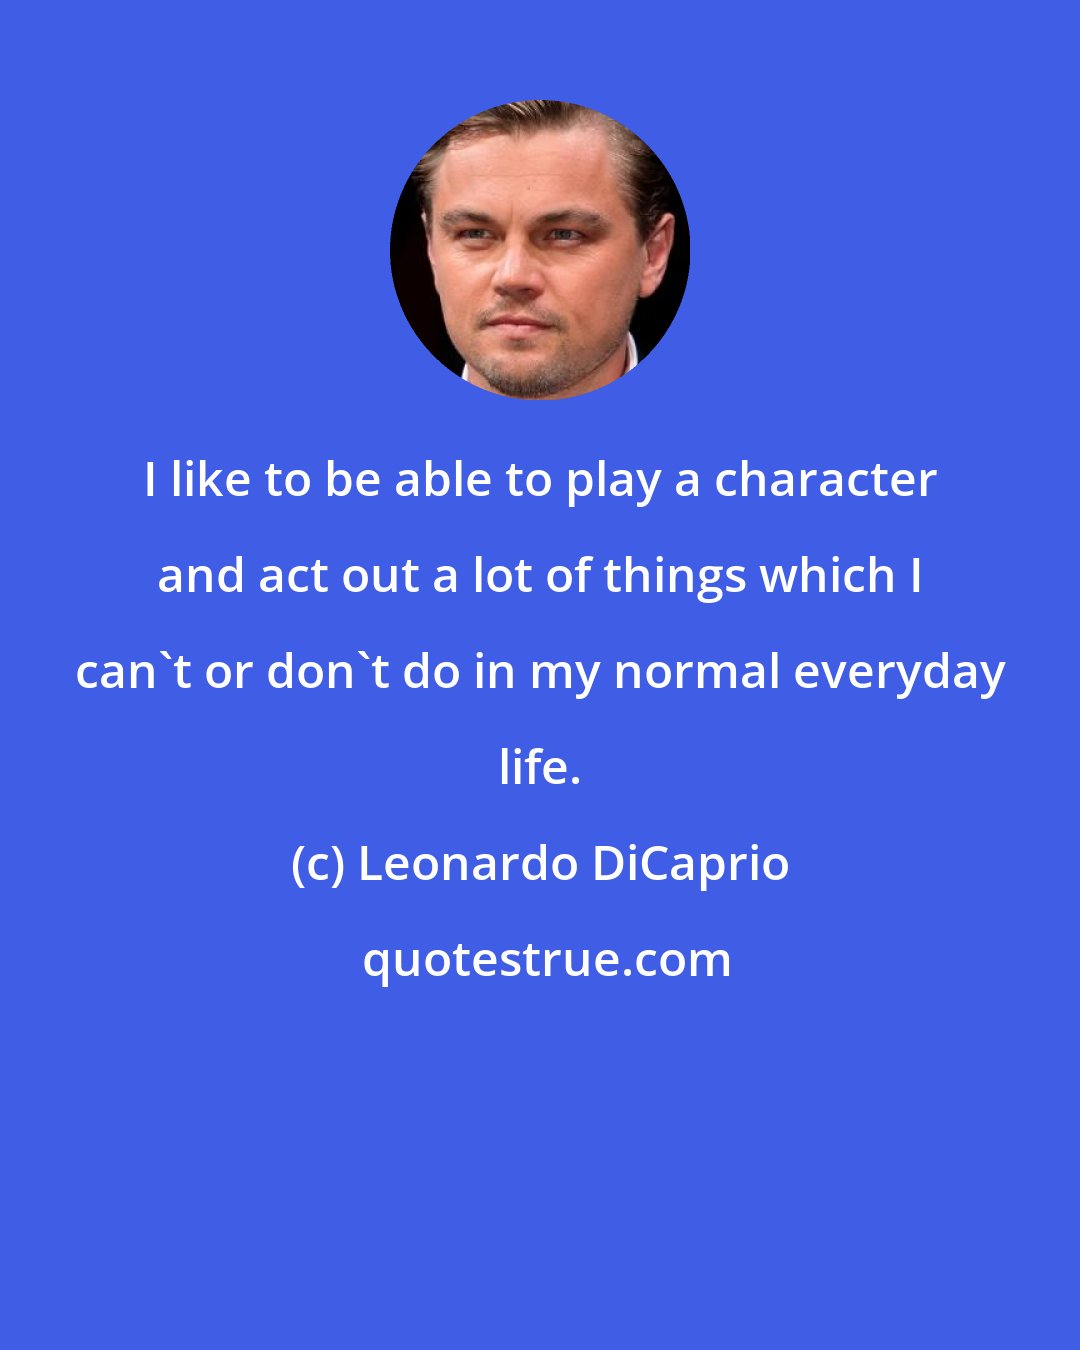 Leonardo DiCaprio: I like to be able to play a character and act out a lot of things which I can't or don't do in my normal everyday life.